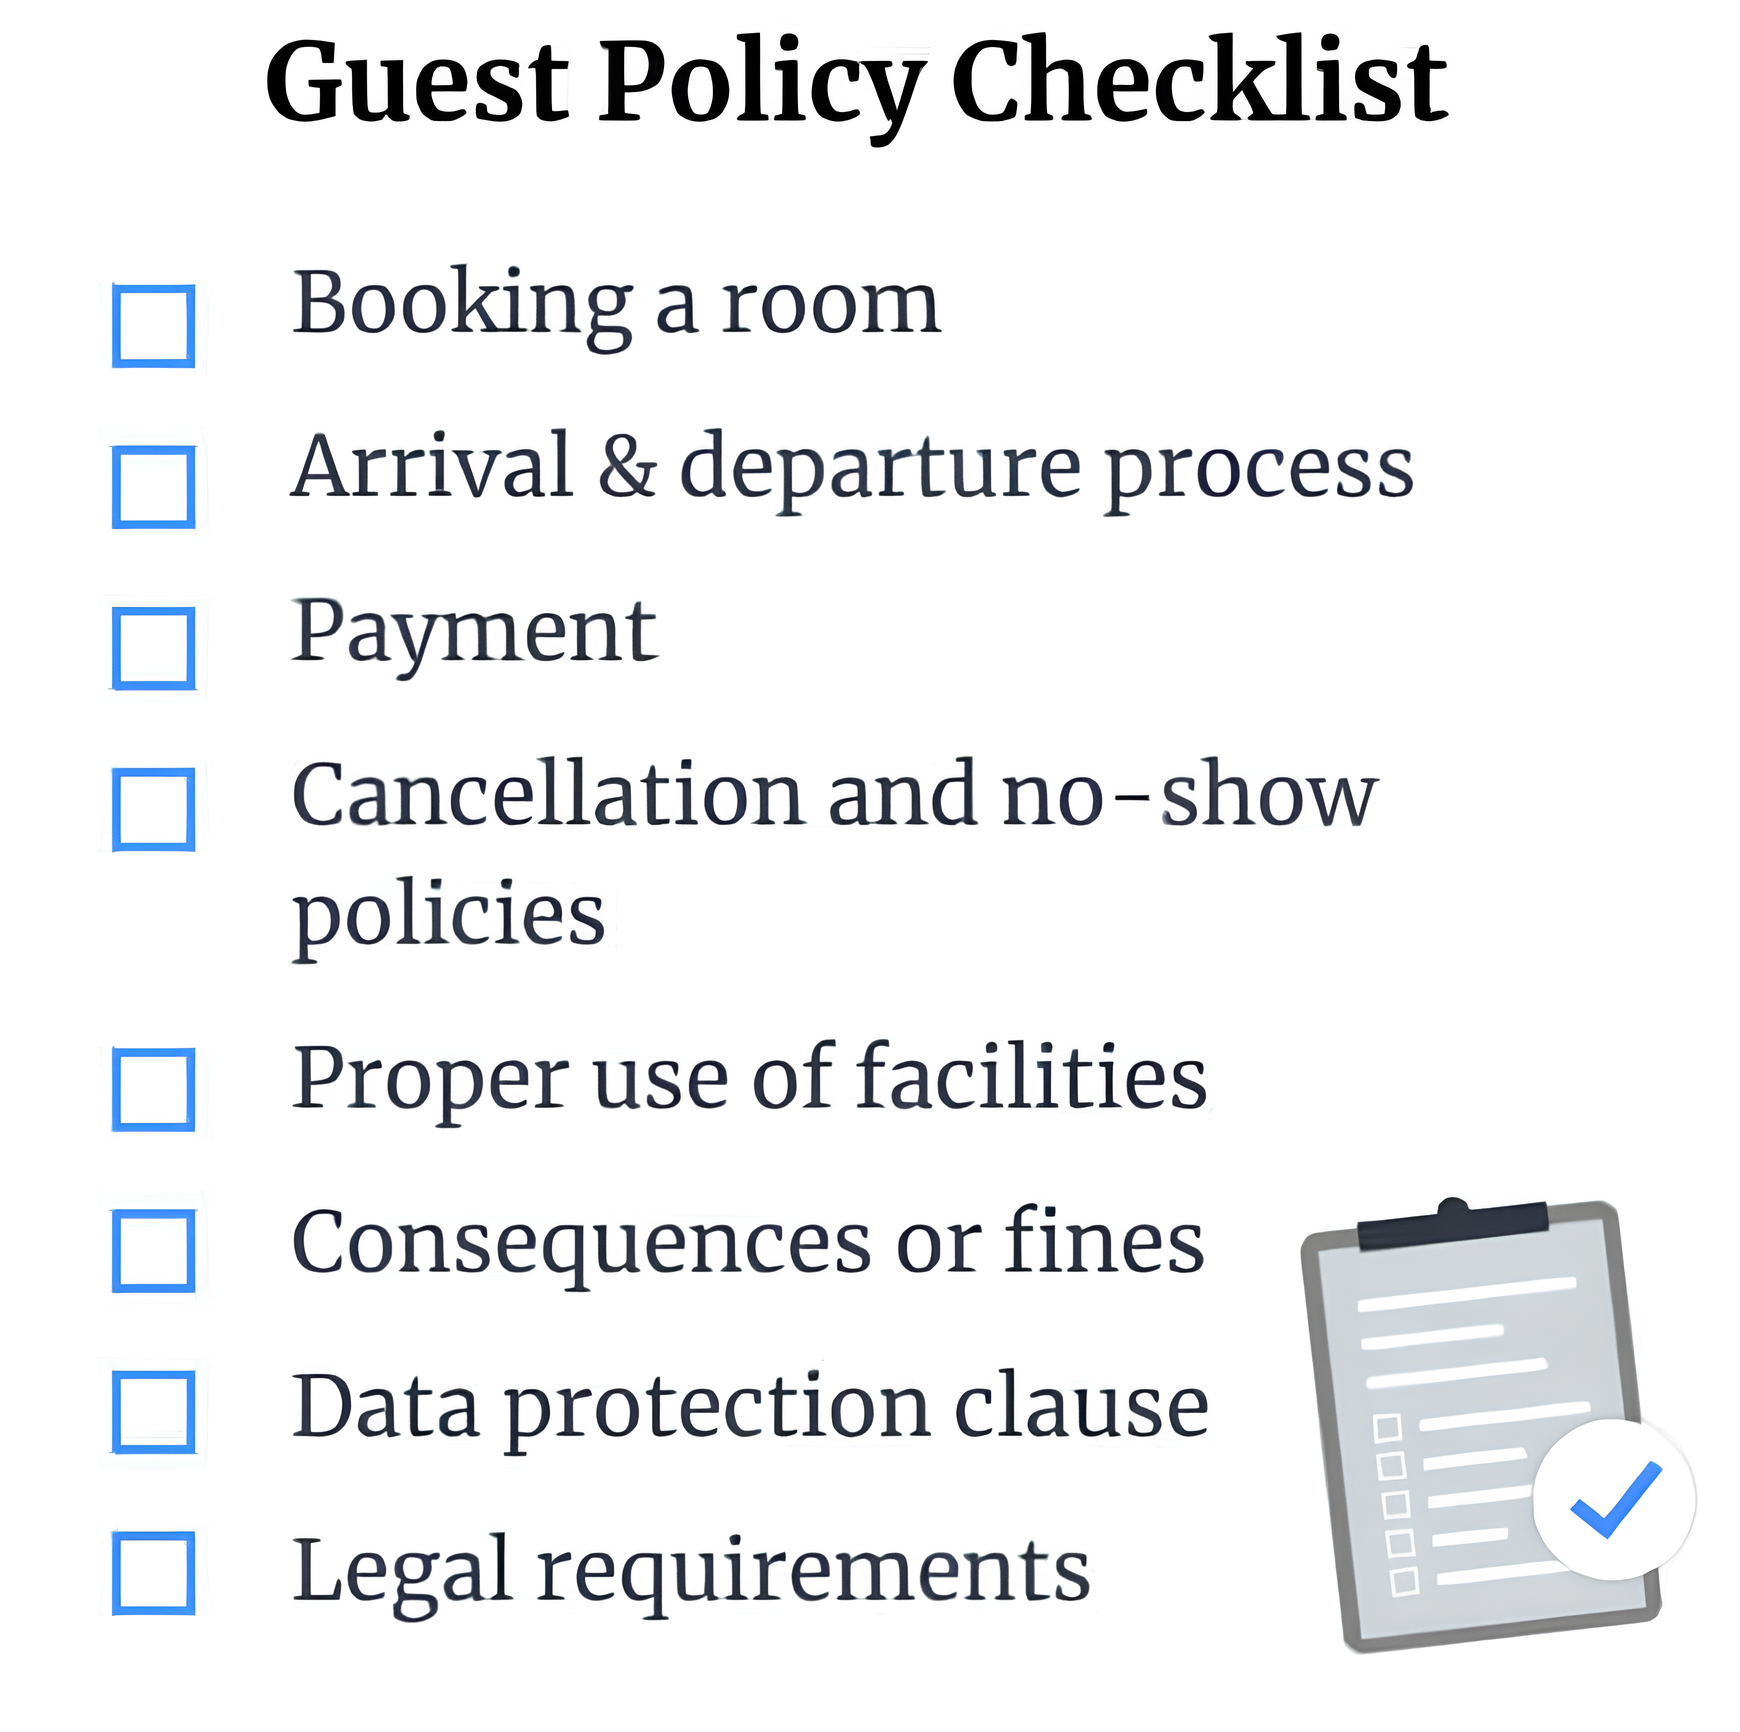 Examination of Hotel Chain Policies